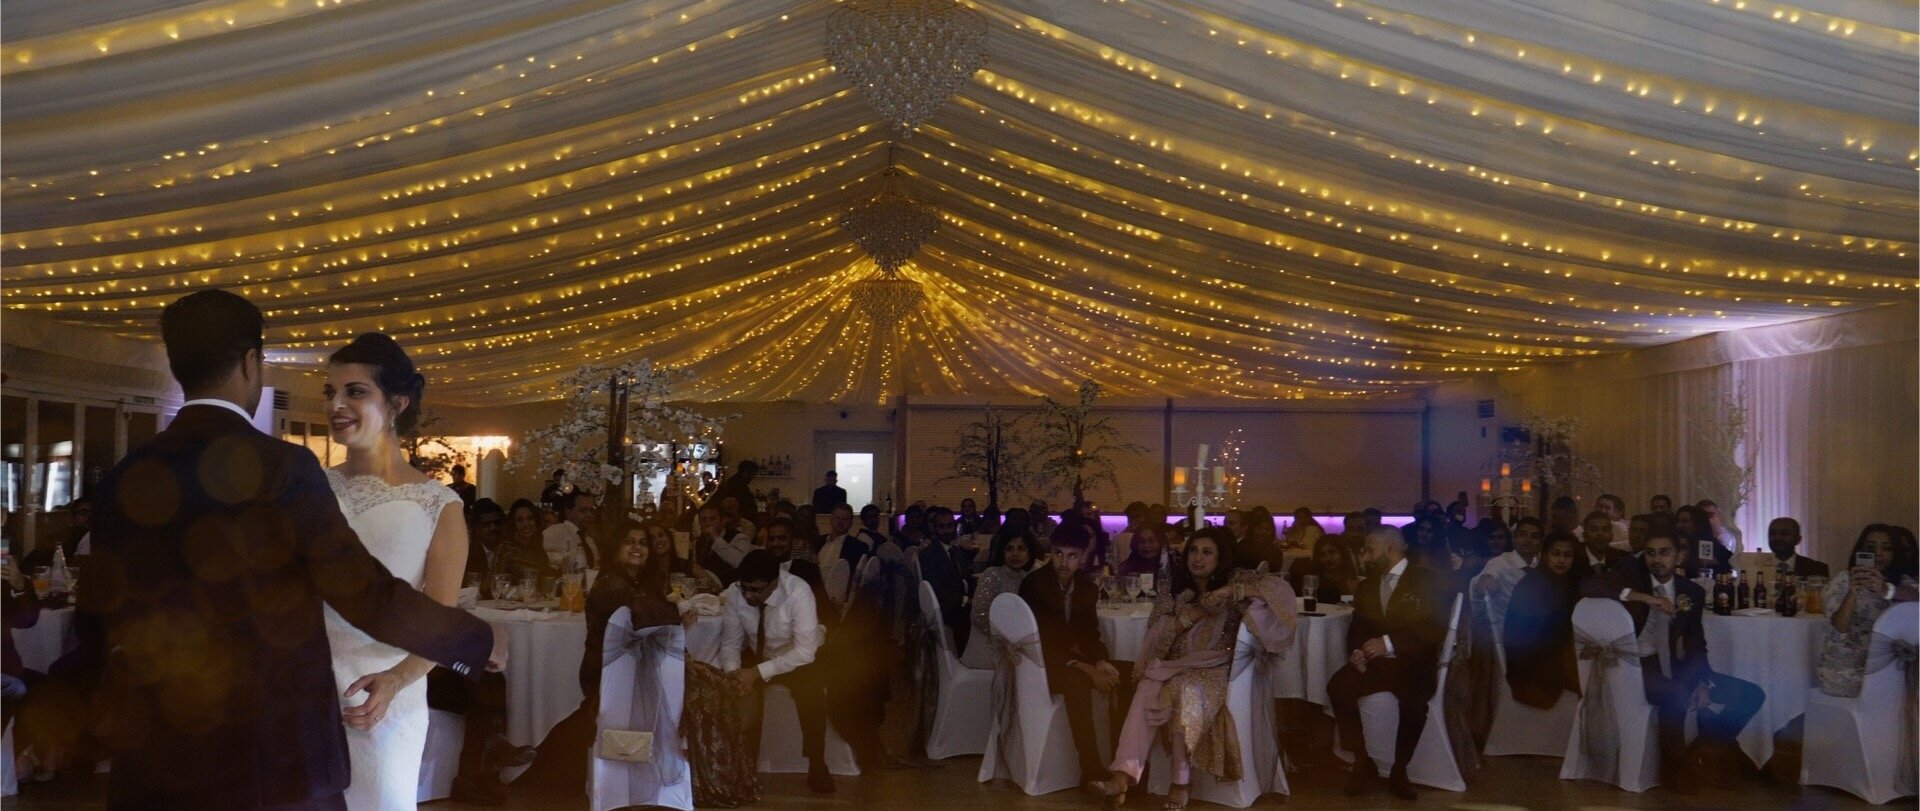 The First Dance at Quendon Hall Essex.jpg